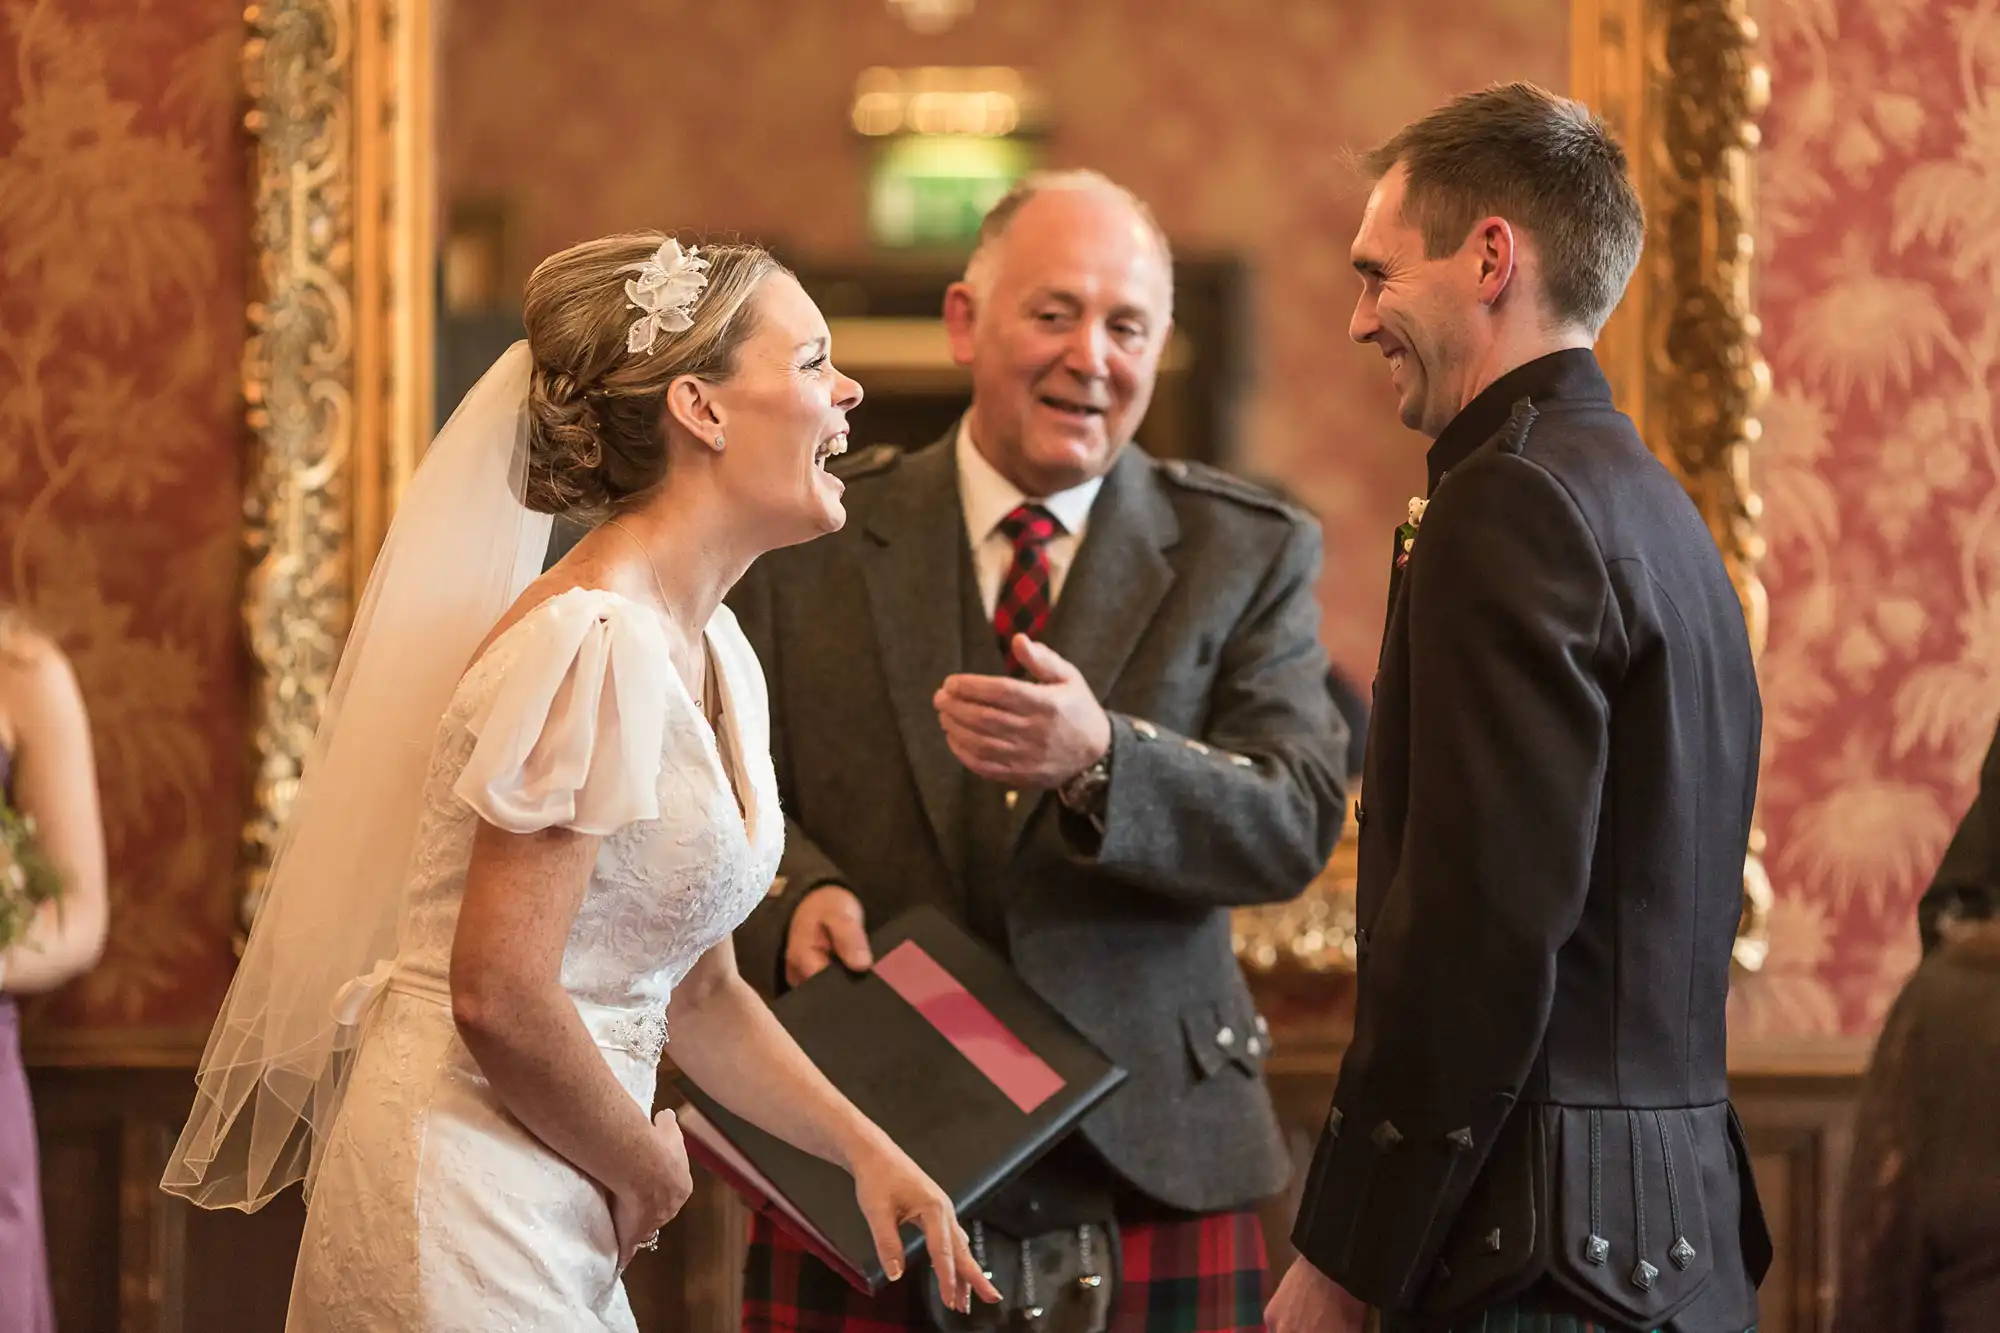 A bride in a white dress and a groom in a military uniform laugh joyfully, conversing with an older man in a kilt at a wedding.